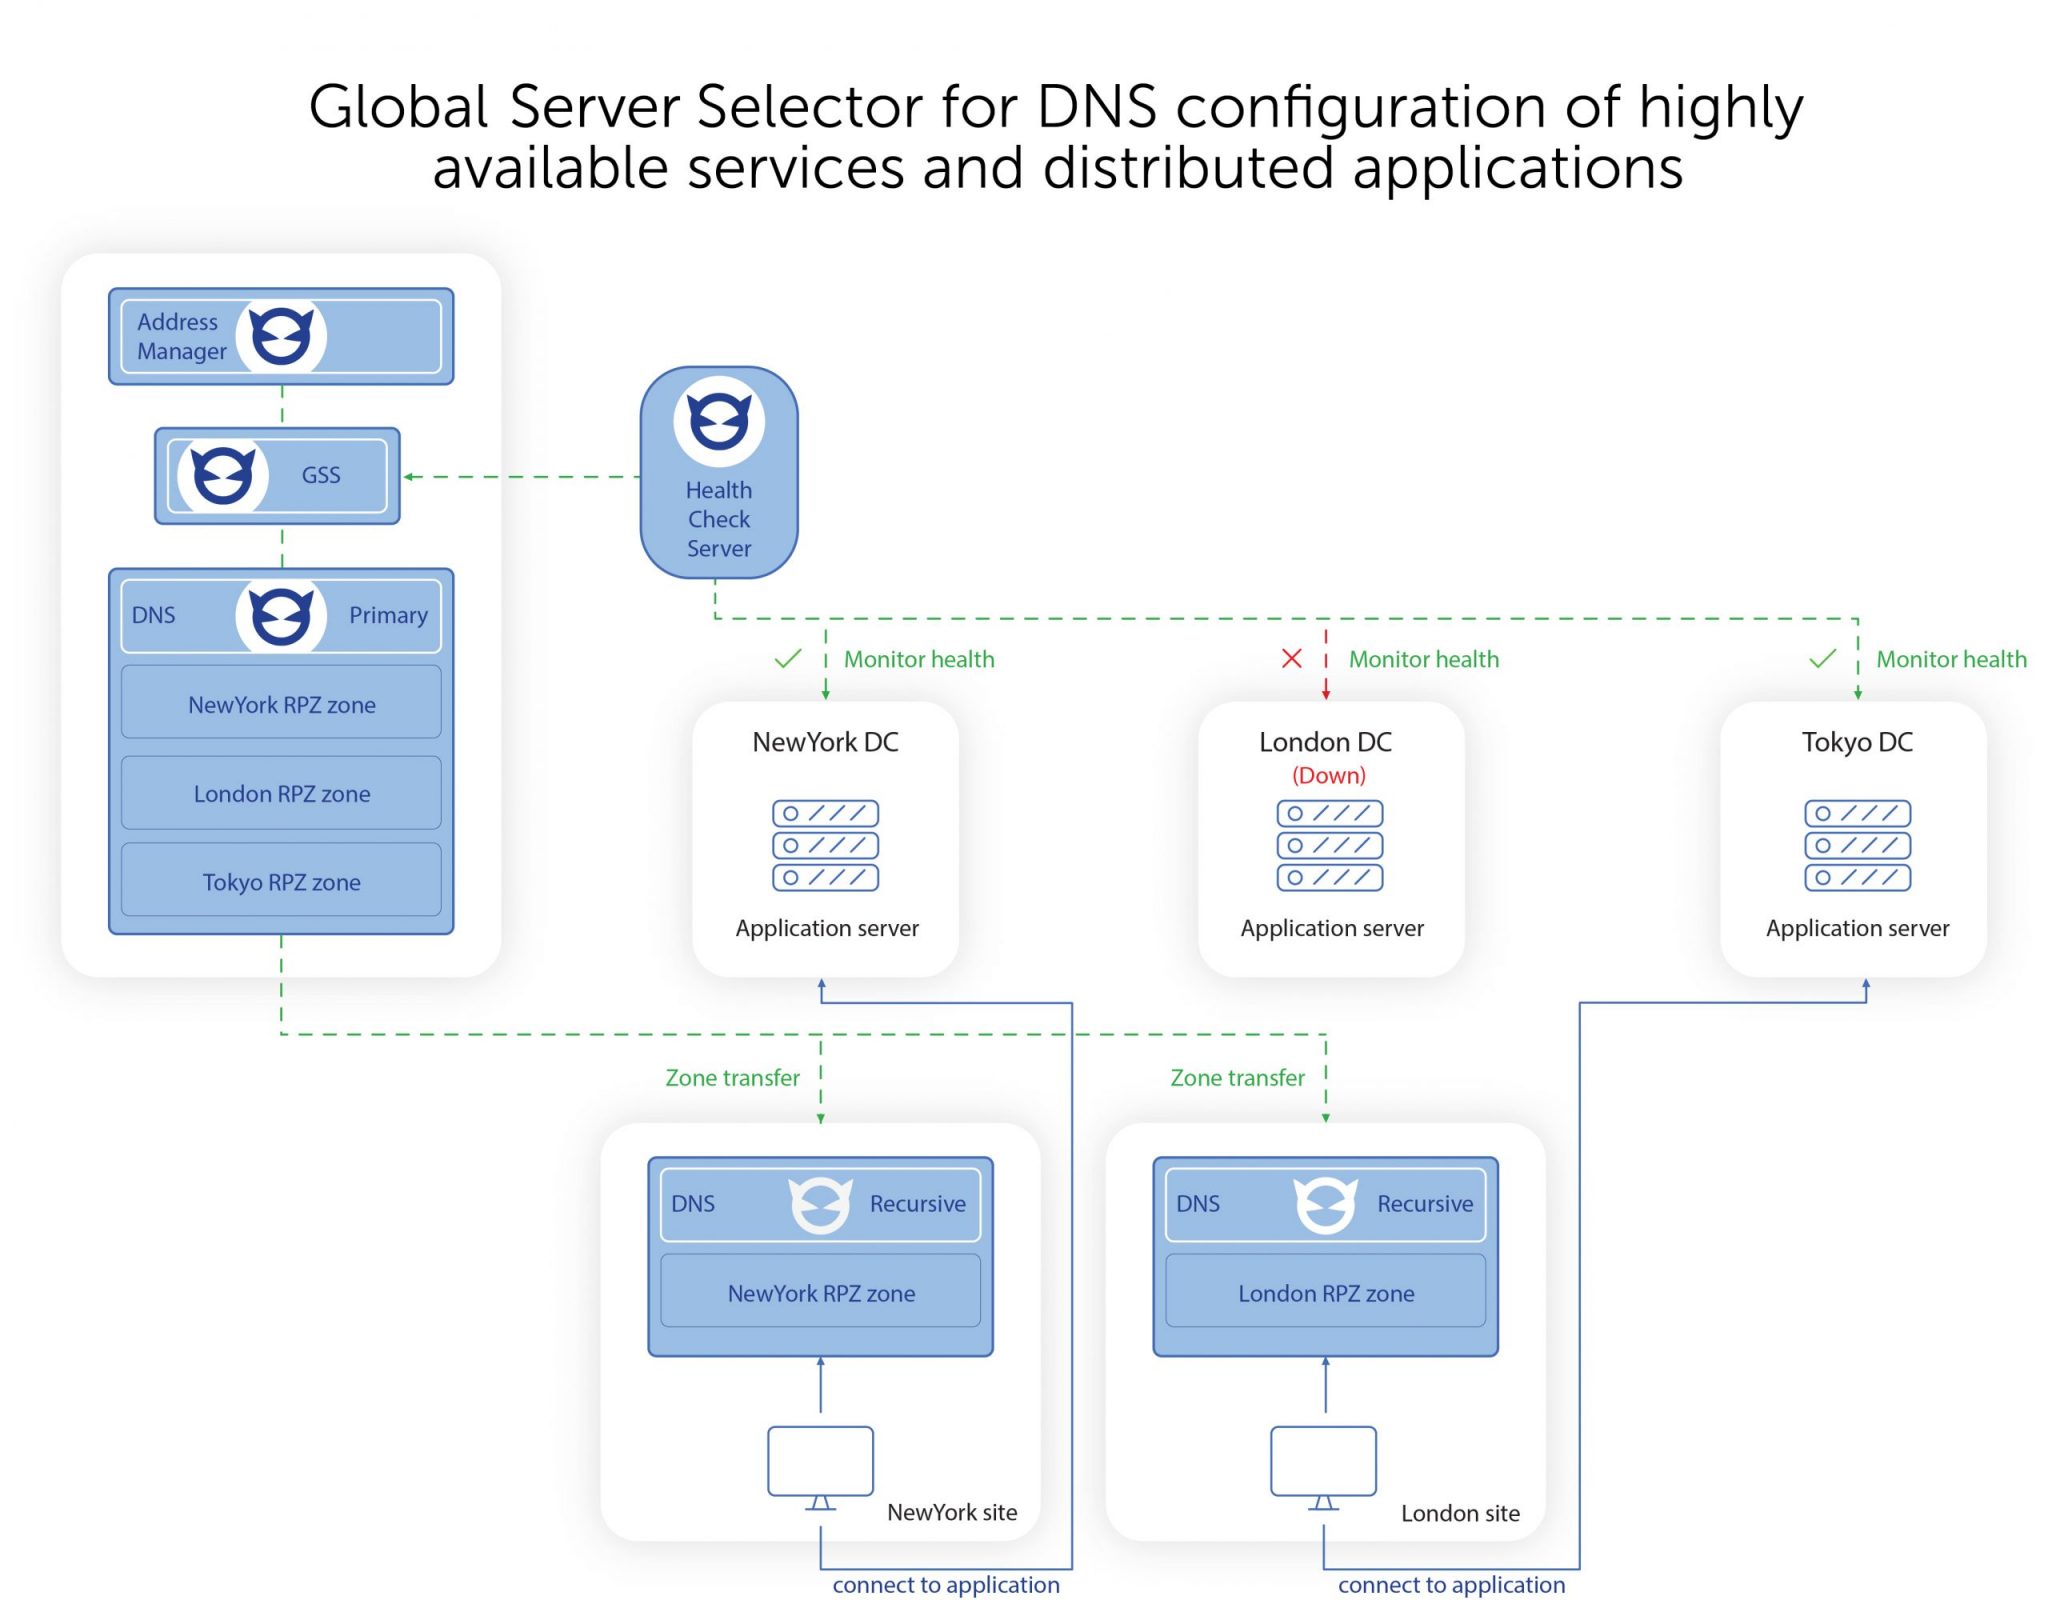 Global Server Selector for DNS configuration of highly available services and distributed applications